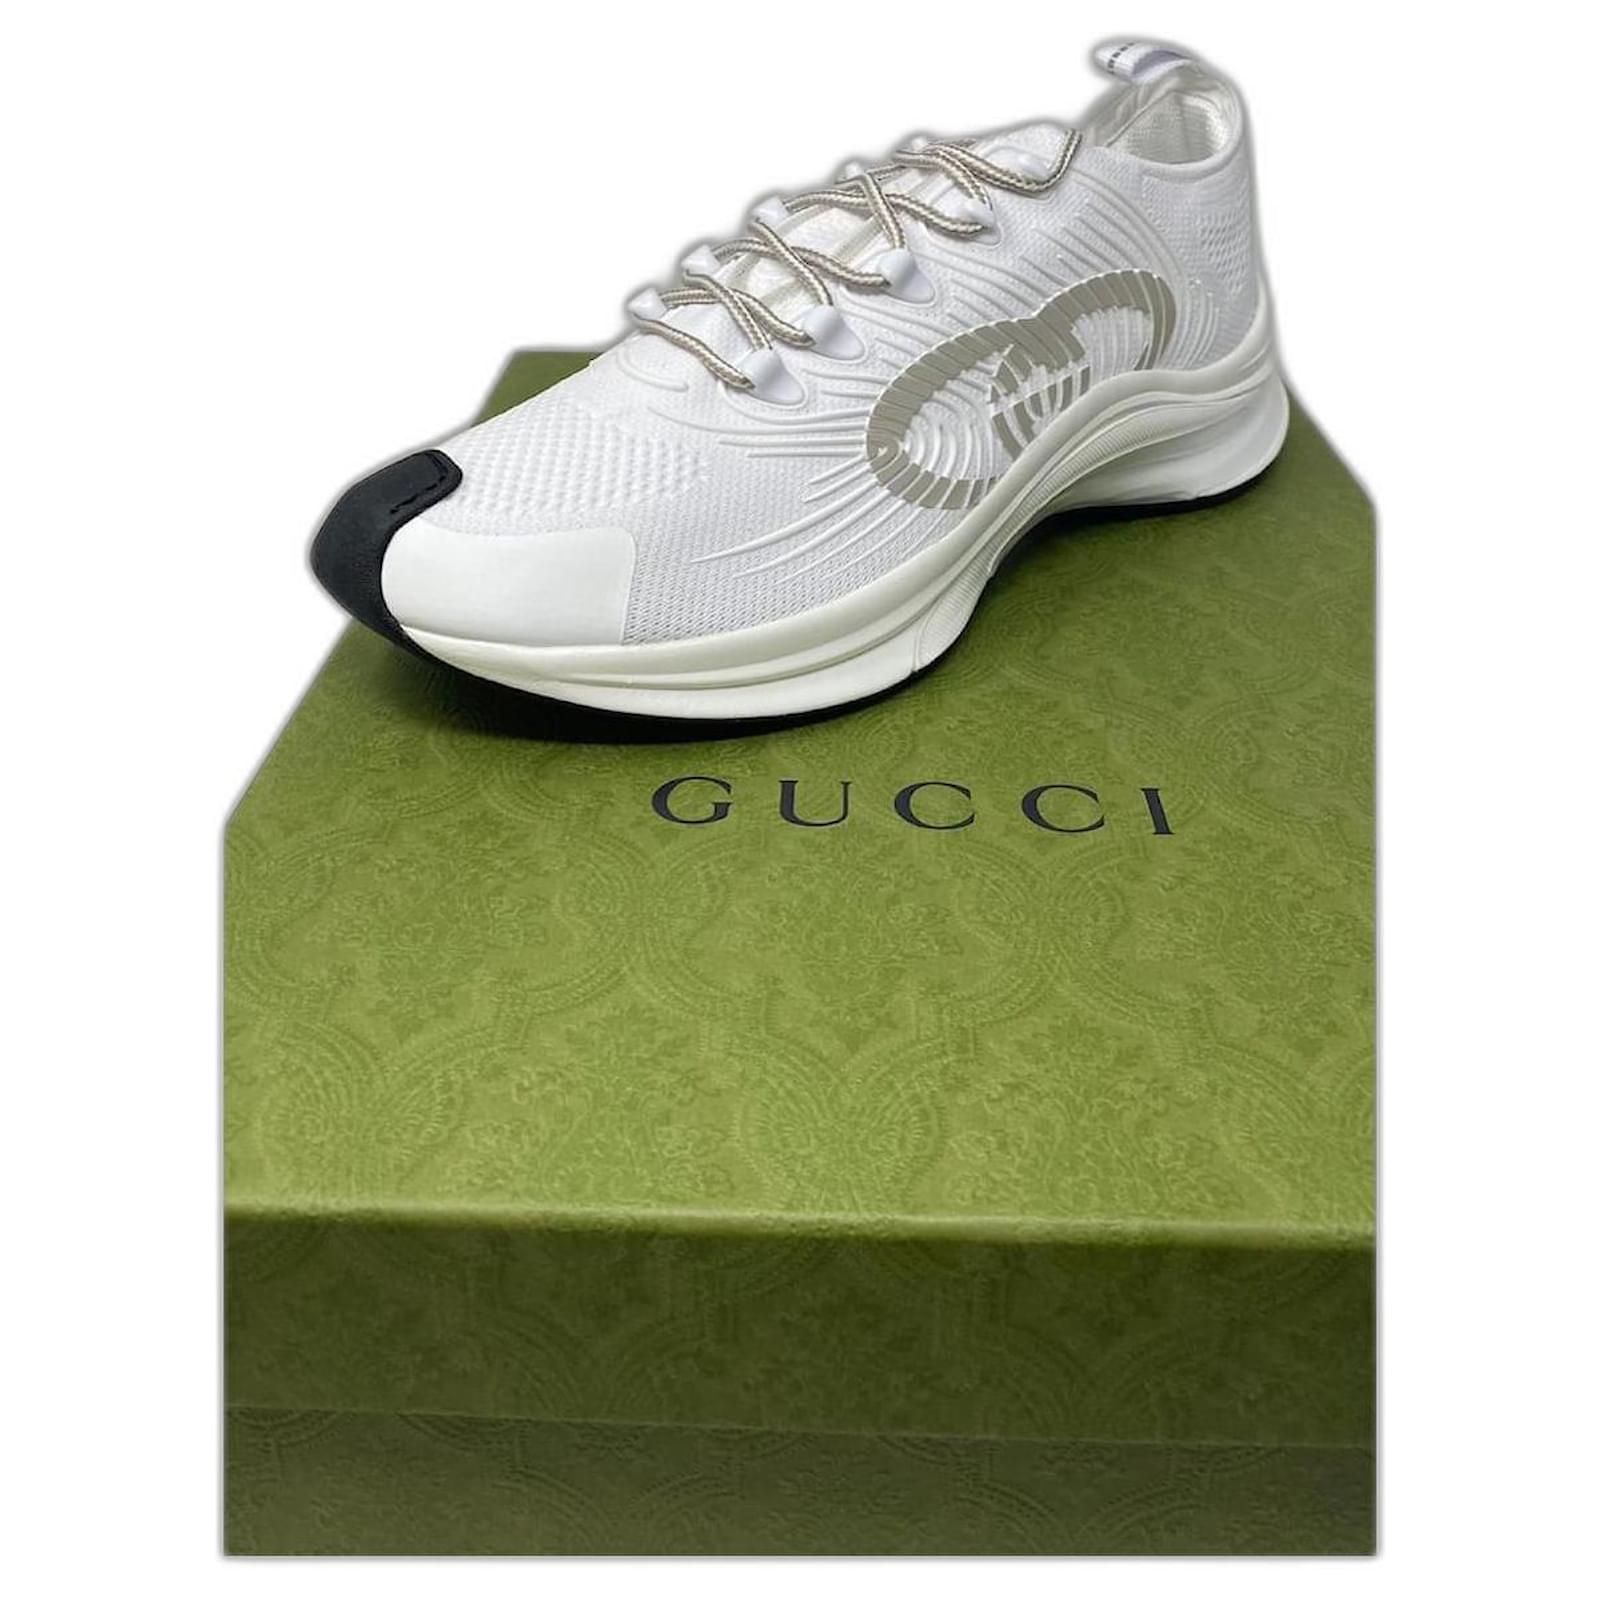 Trainers for Men, Sneakers, Gucci